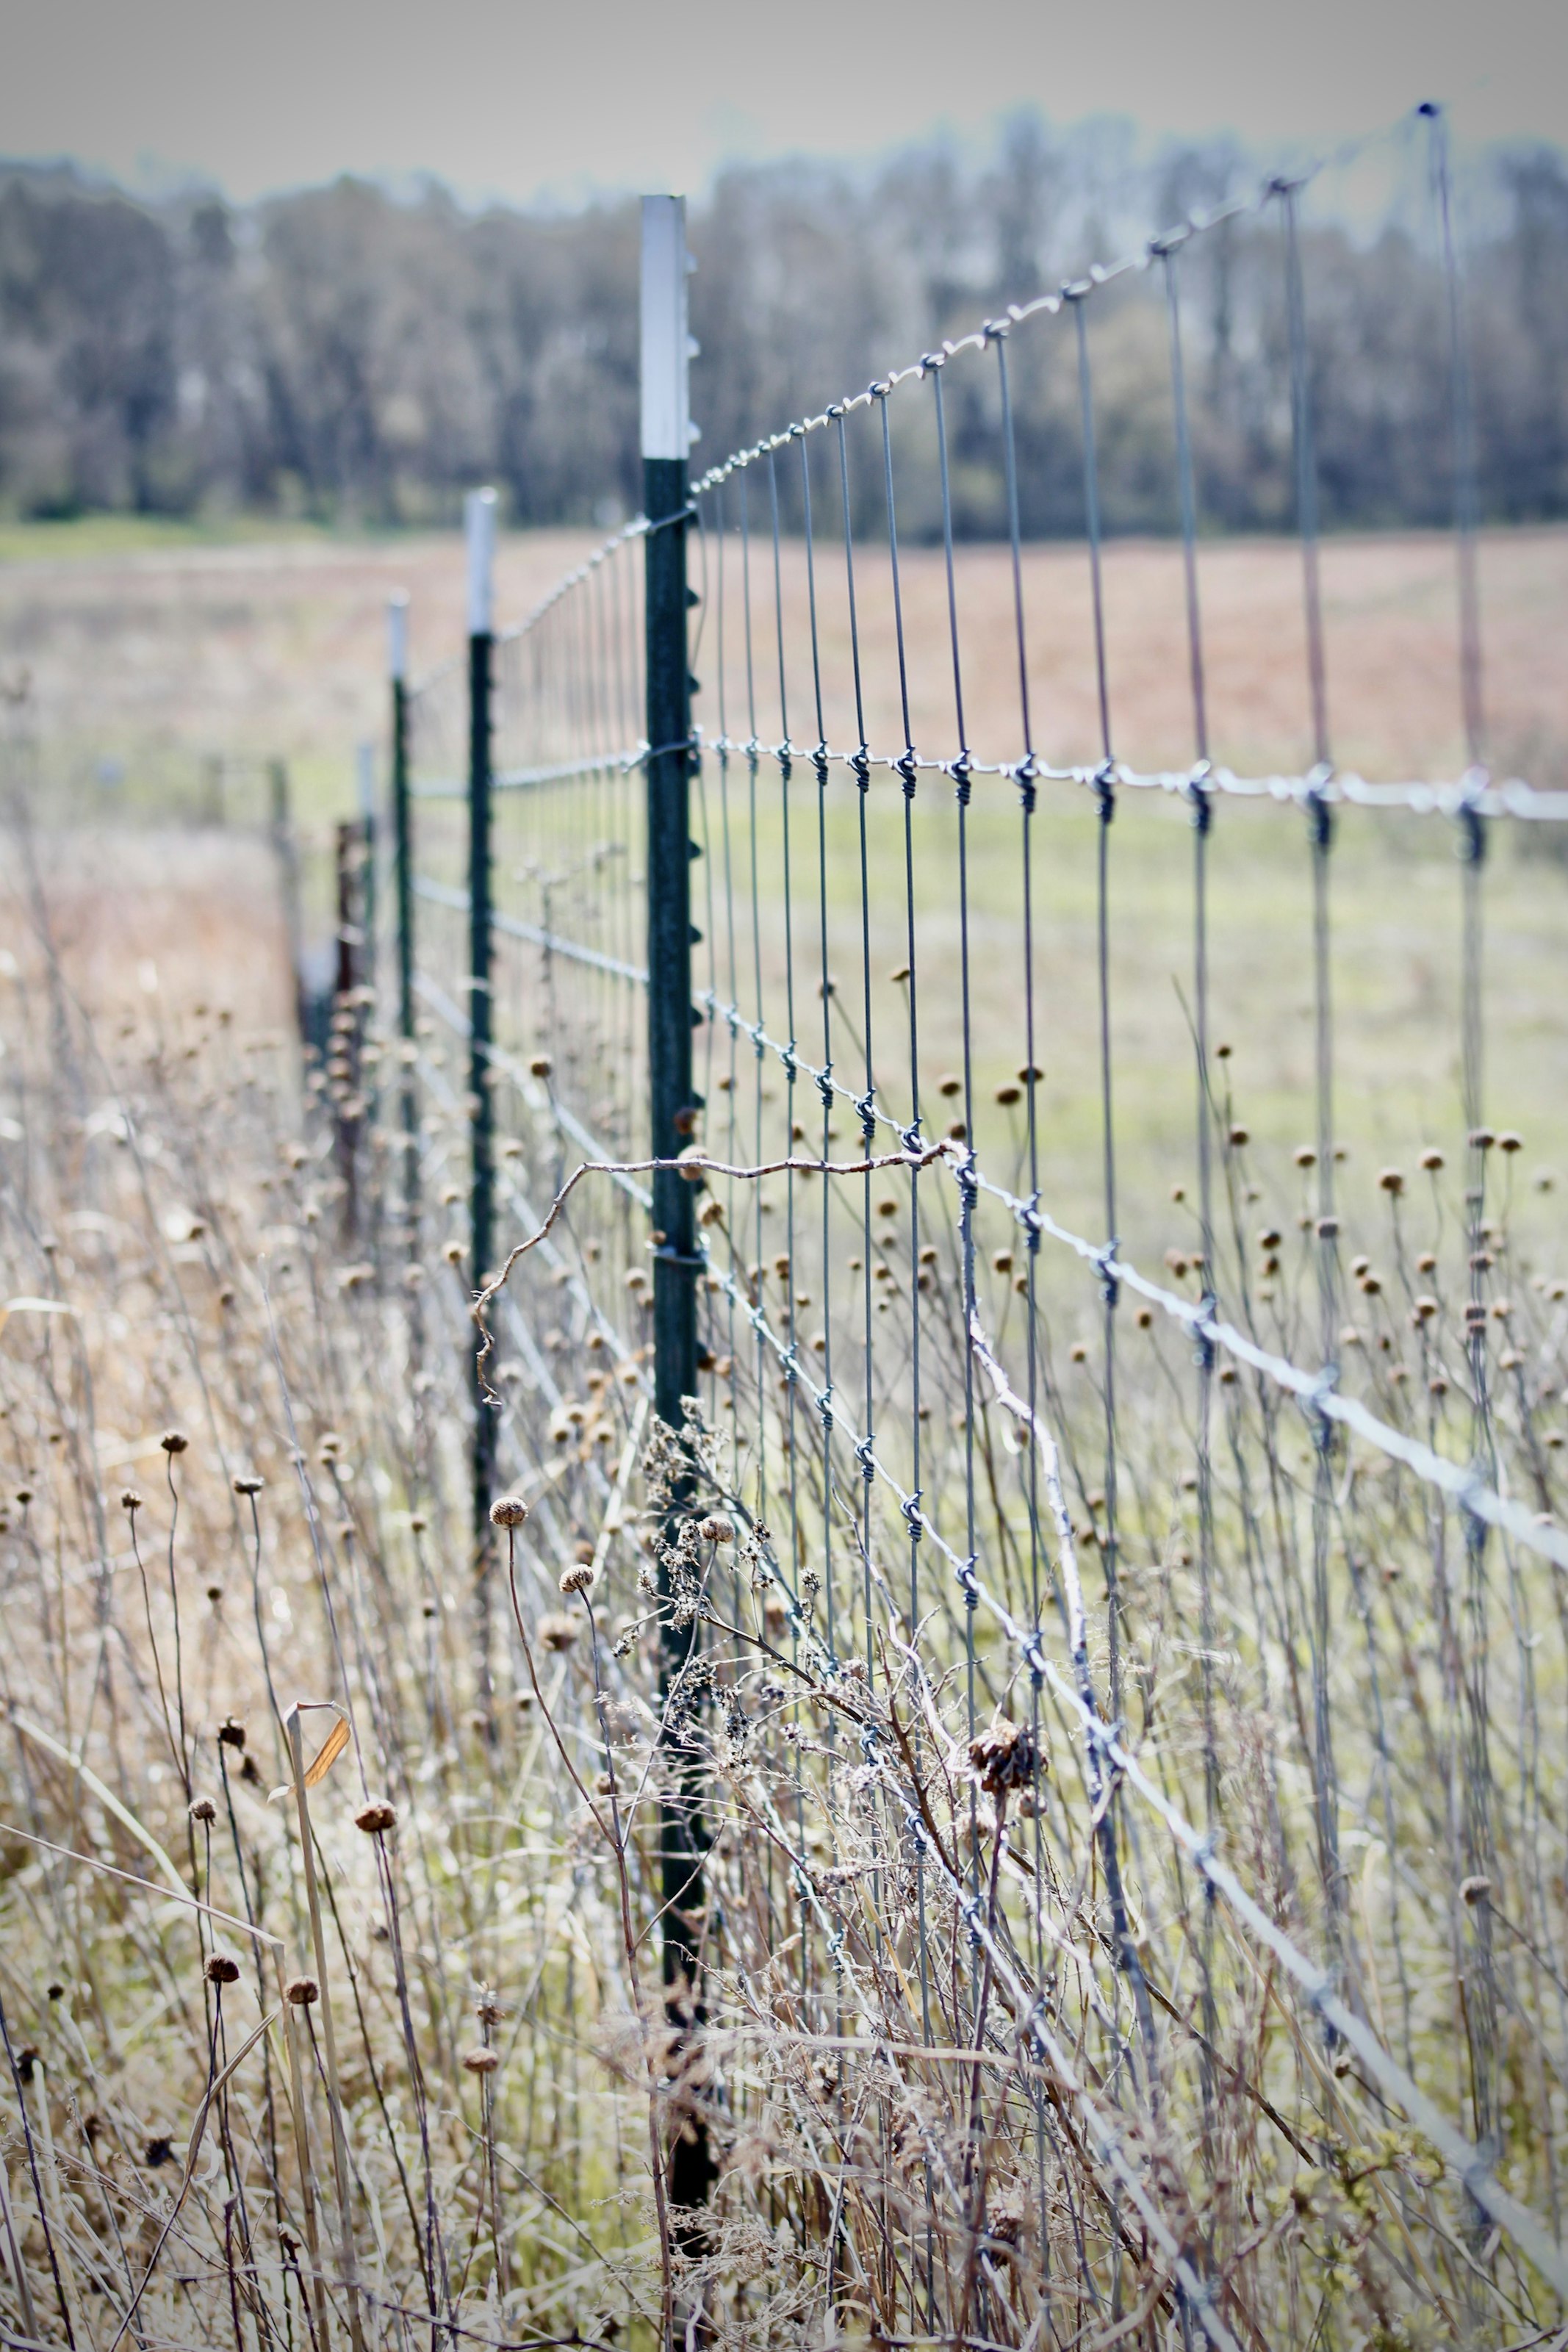 Image of Chain Link Dog Fences on the field